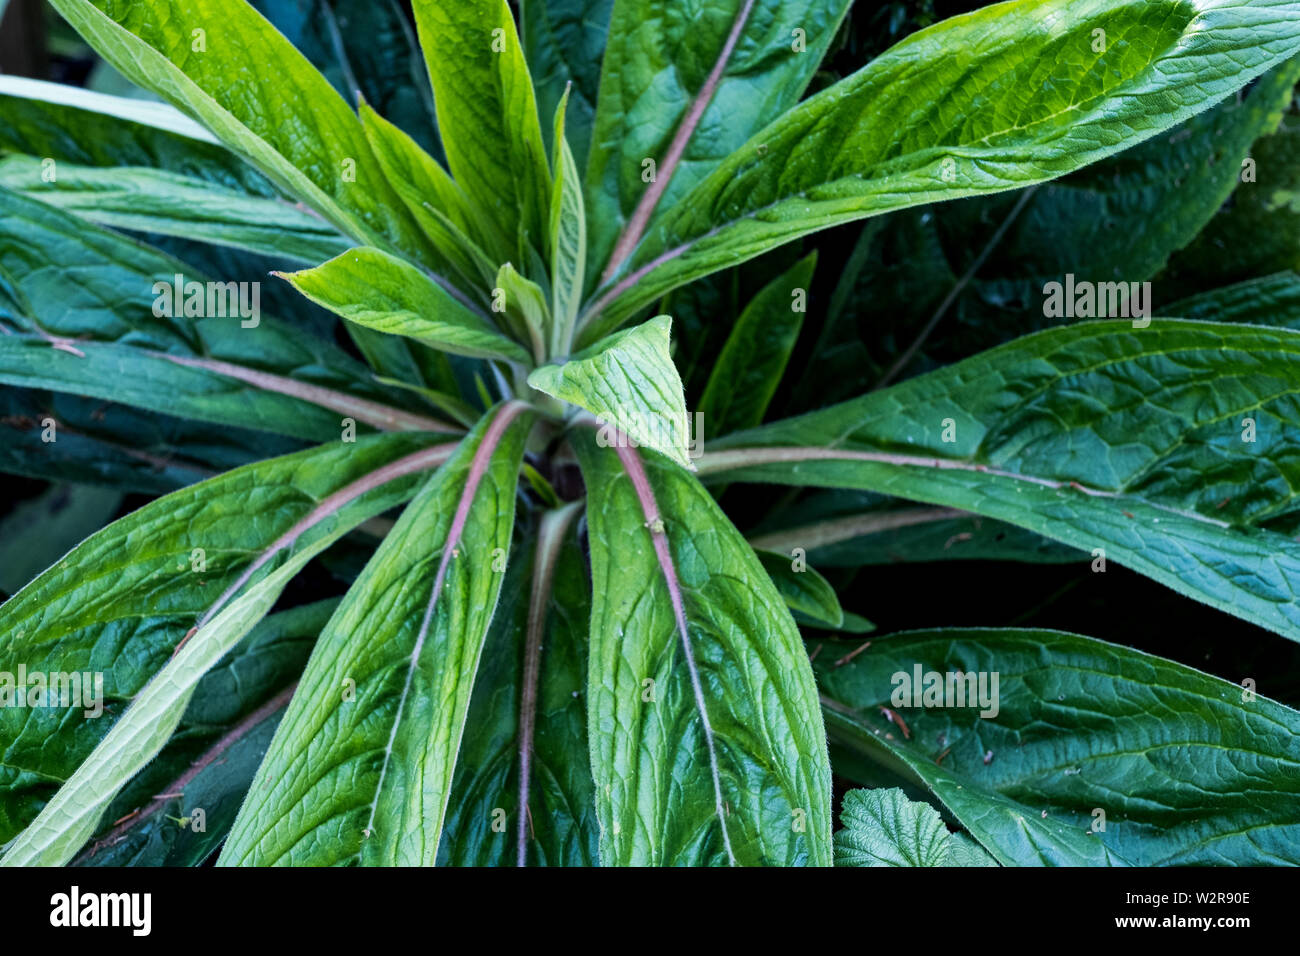 High angle close up of plant with green, sword-shaped leaves. Stock Photo